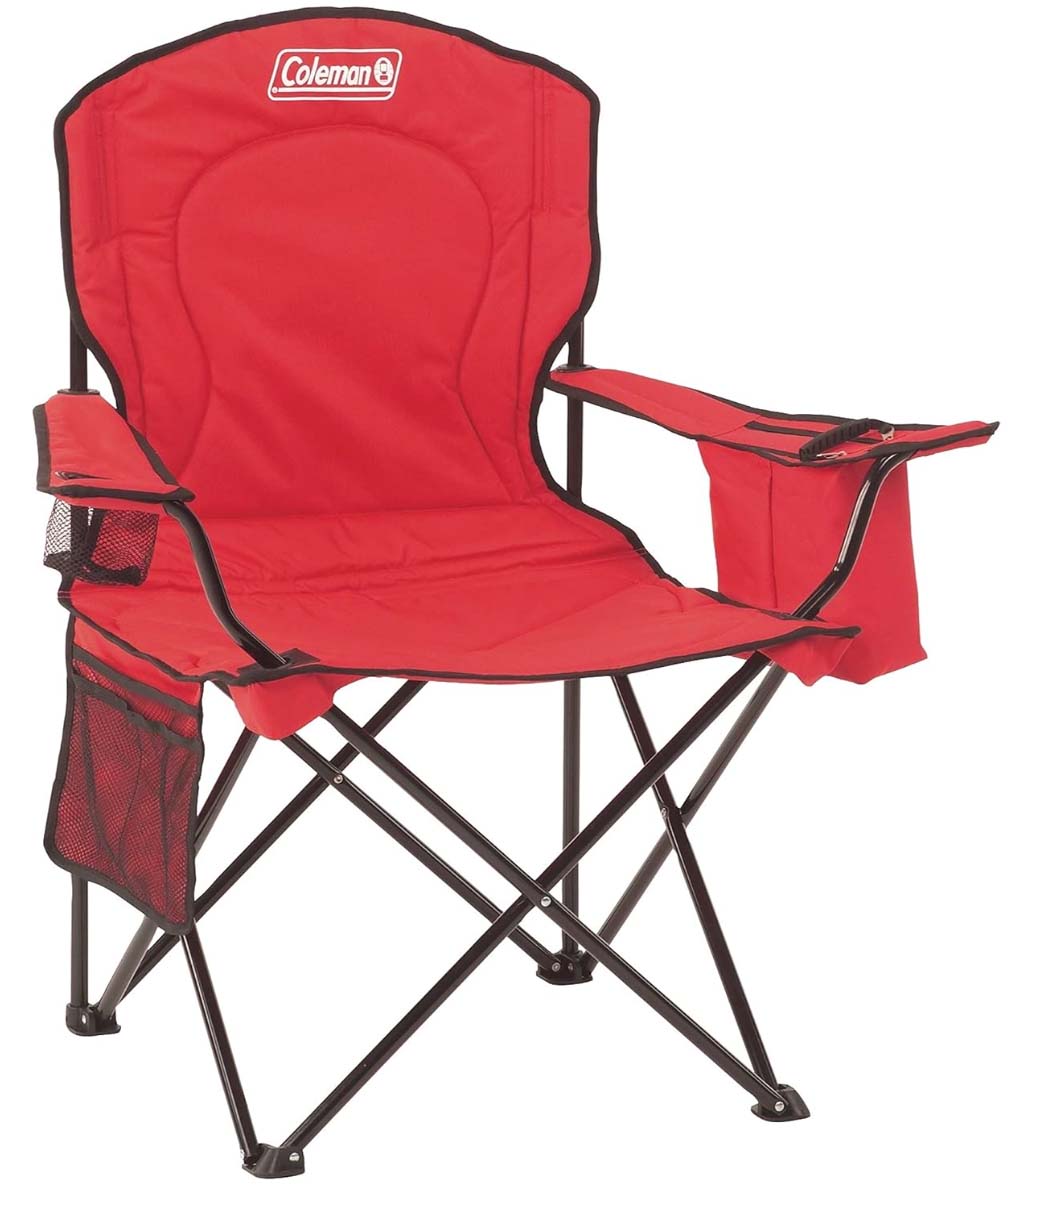  Camping Chair Outdoor Fishing Chair Outdoor Folding Chair  Portable Stool Folding Swing Outdoor Relax Chairs with Footstool for  Camping Beach Fishing Folding Chairs for Outside Portable (Color : Red) :  Sports